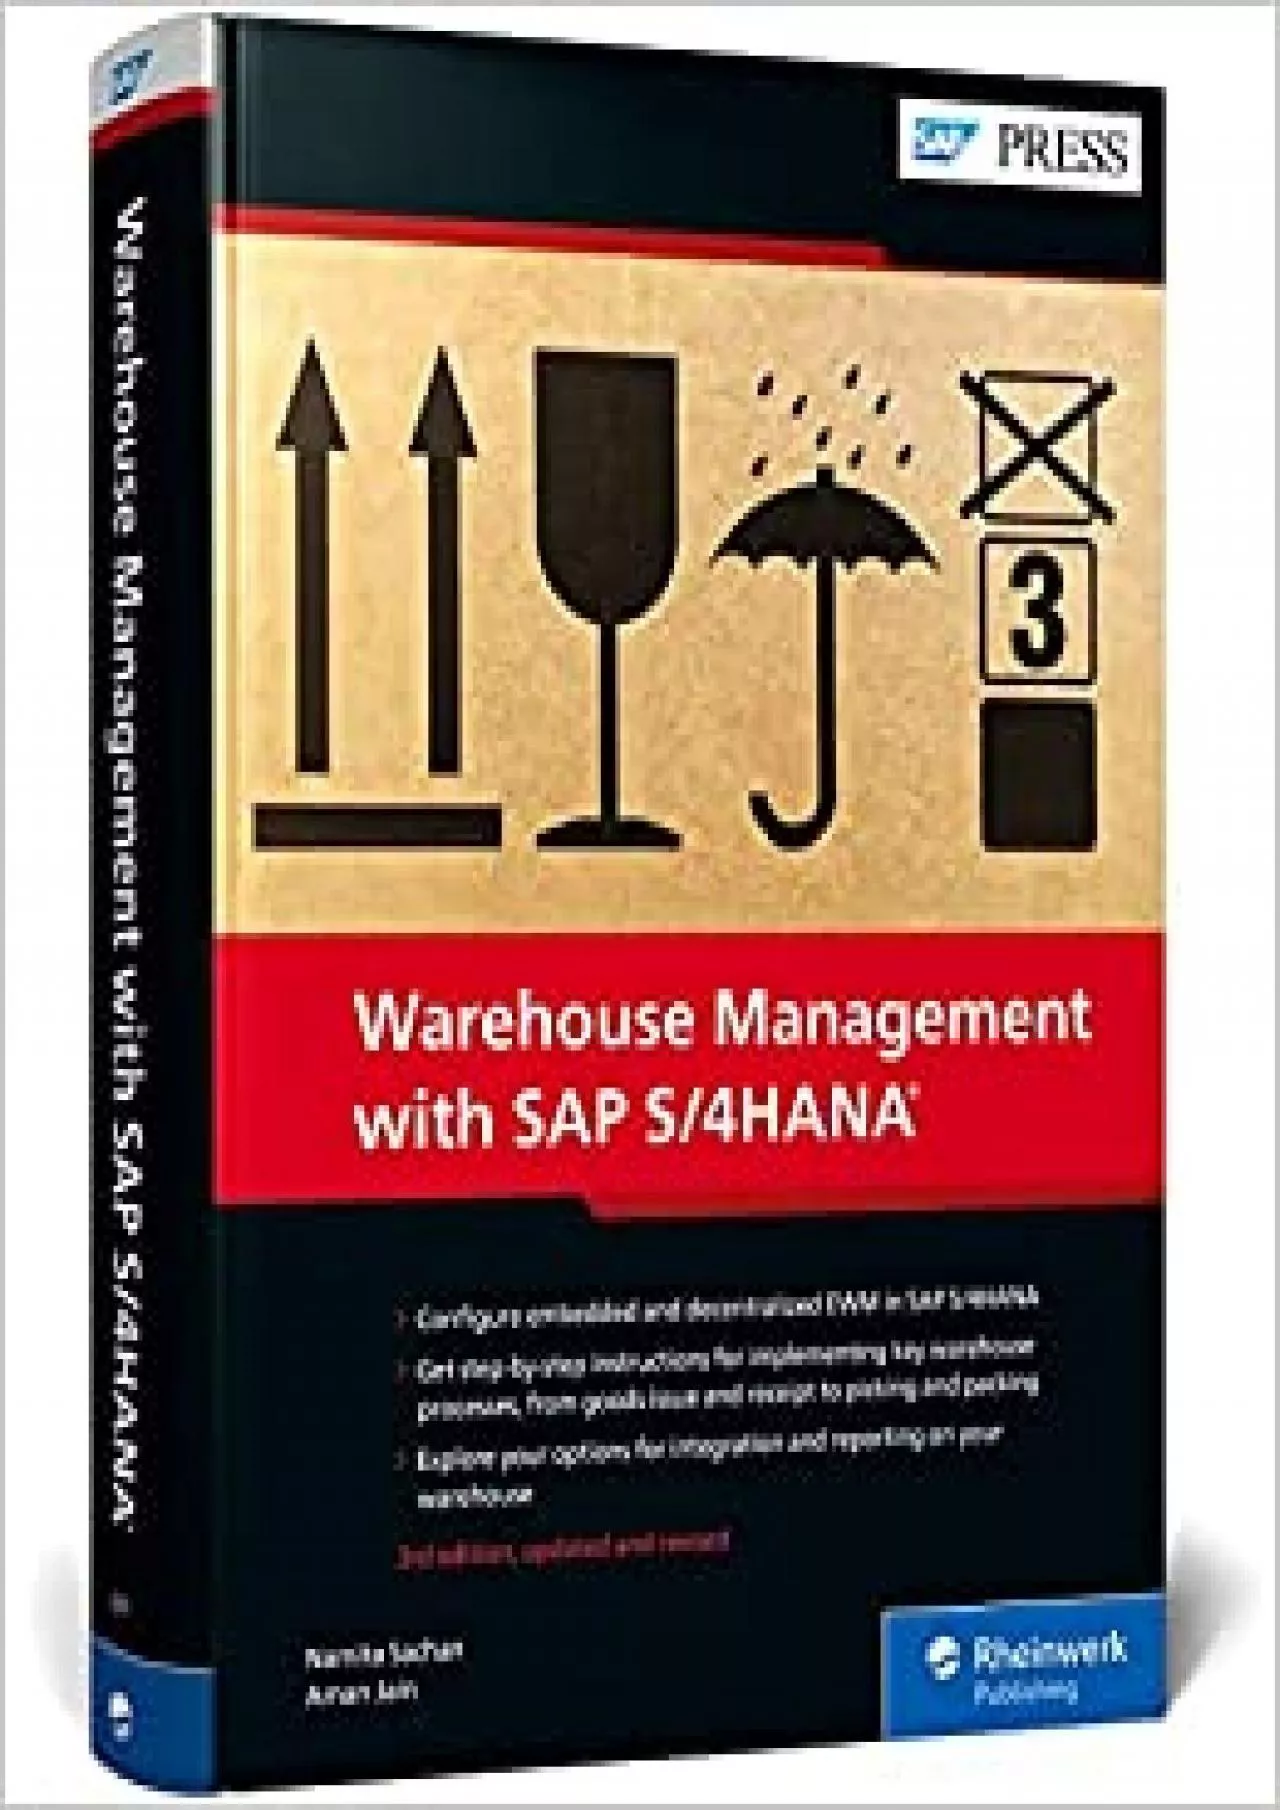 Warehouse Management with SAP S/4HANA: Embedded and Decentralized EWM (Third Edition)